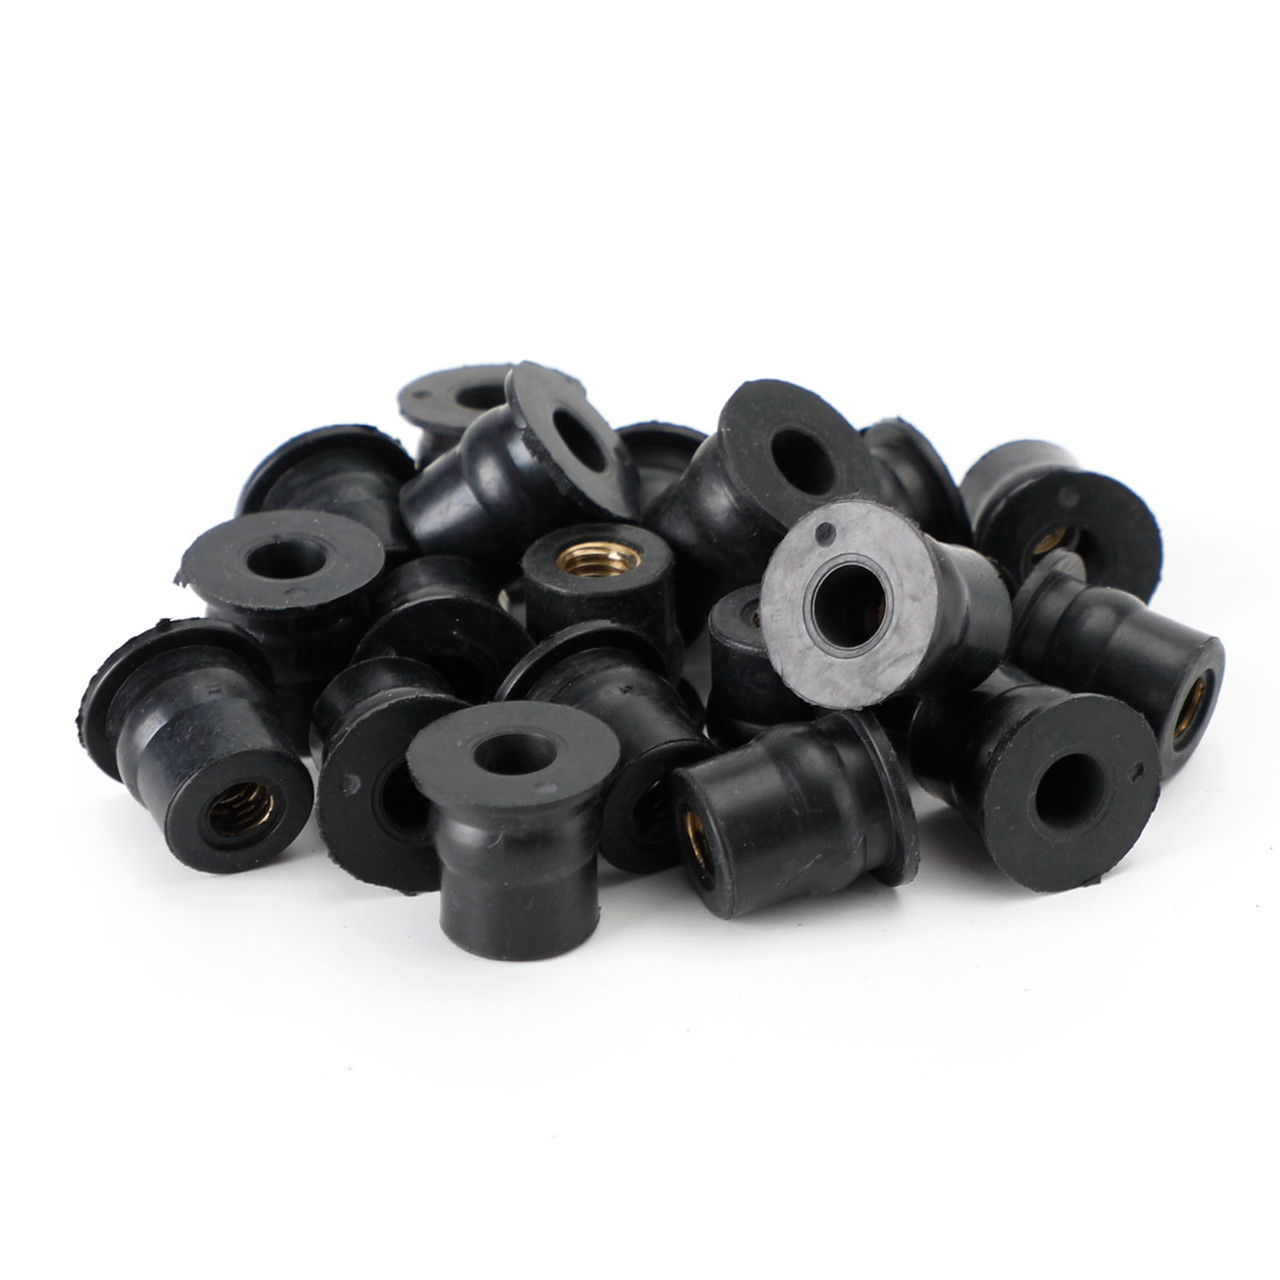 20pcs M6 Rubber Well Nuts Wellnuts for Fairing & Screen Fixing Pack of 10 - 13mm Hole